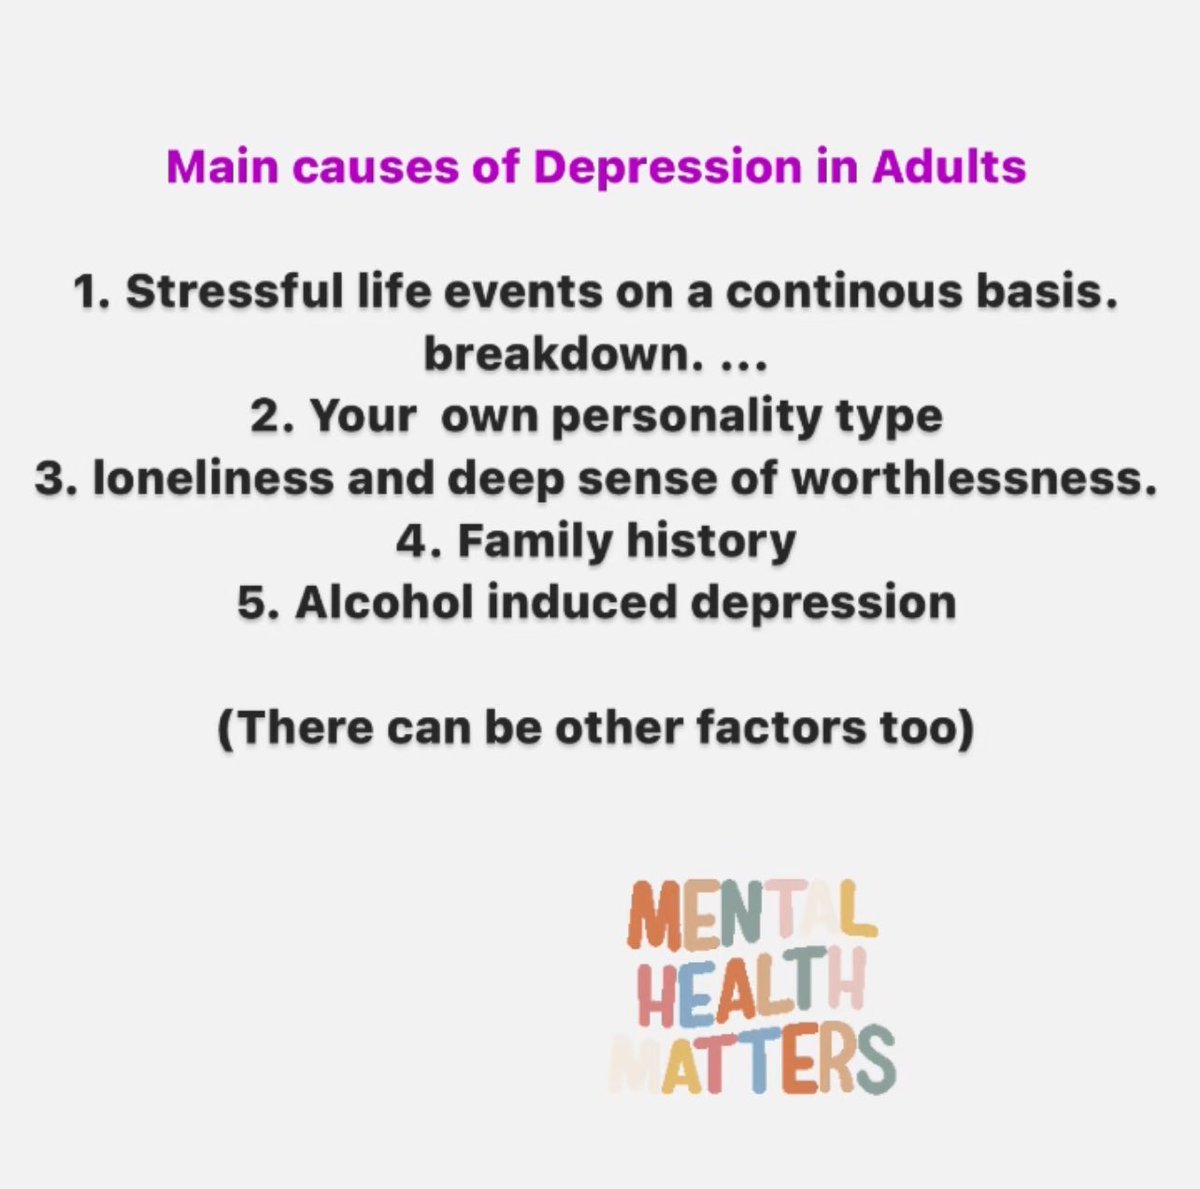 Depression (major depressive disorder) is a common and serious medical illness that negatively affects how you feel, the way you think and how you act. It is not the same as sadness #mentalhealth #depressionhelp #mentalhealth @WHO @WHOAFRO